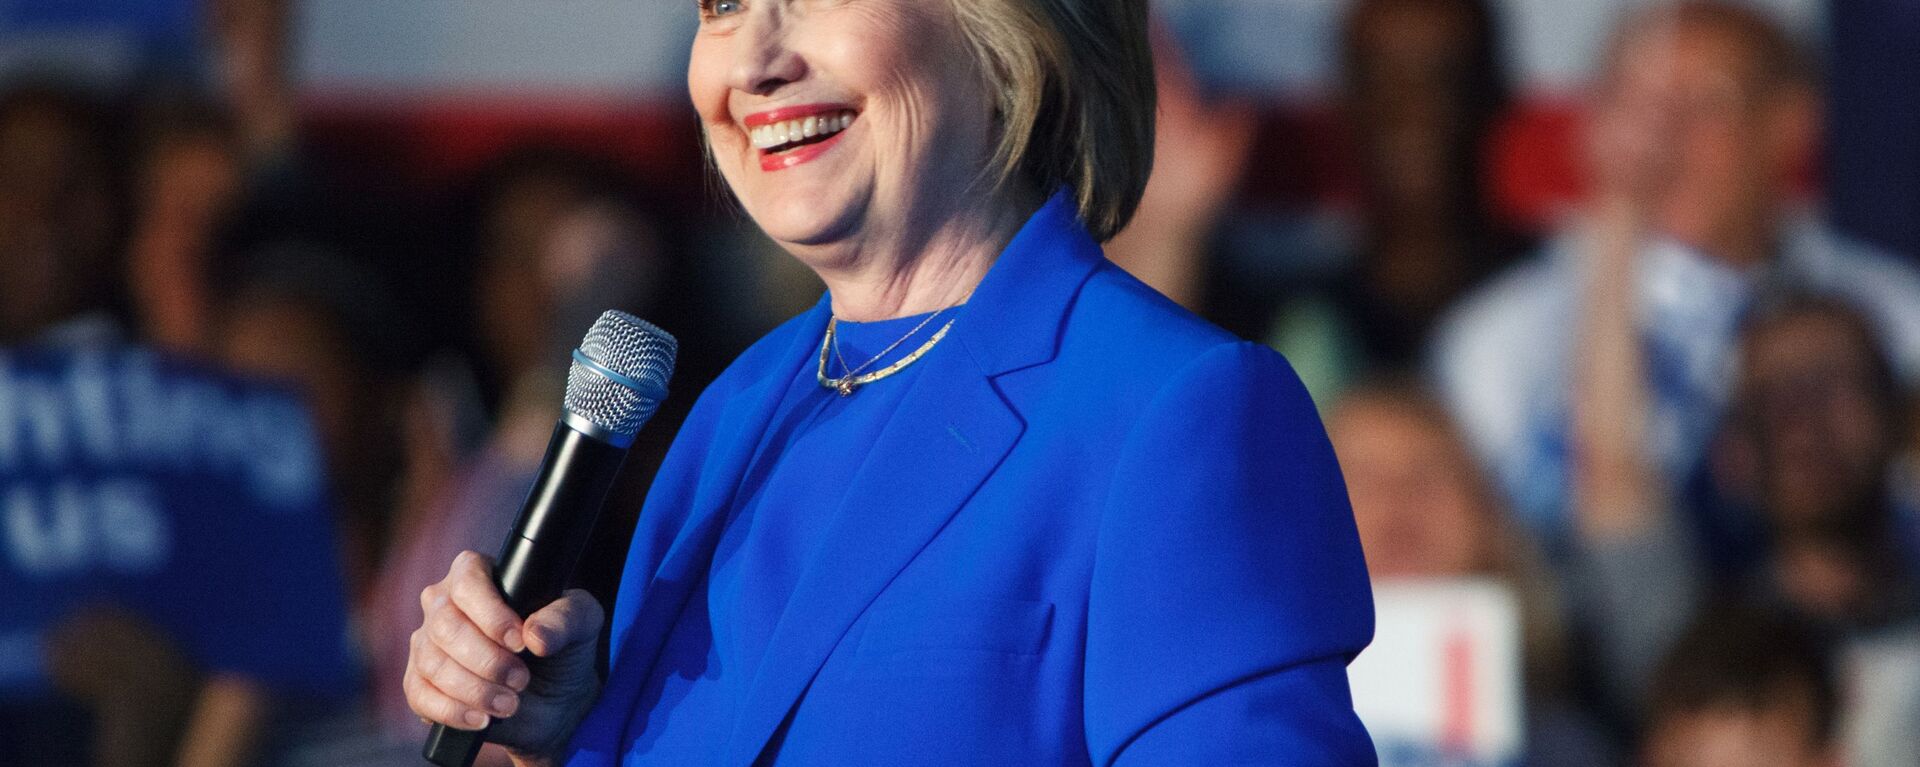 Hillary Clinton, then-Democratic presidential candidate, speaking at a campaign rally in Louisville, Kentucky in May 2016. - Sputnik International, 1920, 06.11.2021